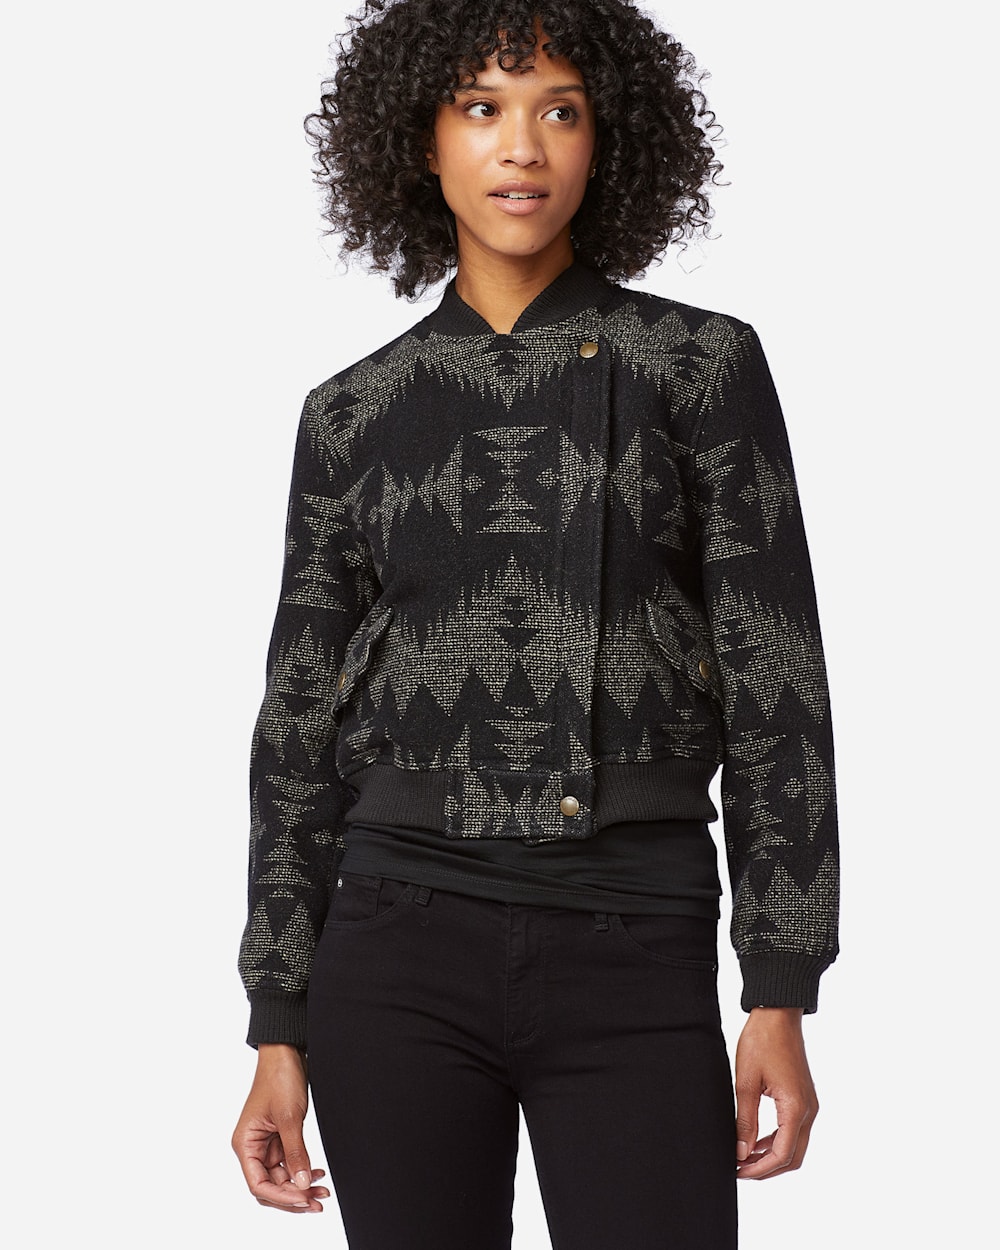 ALTERNATE VIEW OF WOMEN'S JACQUARD BOMBER JACKET IN BLACK SONORA image number 2